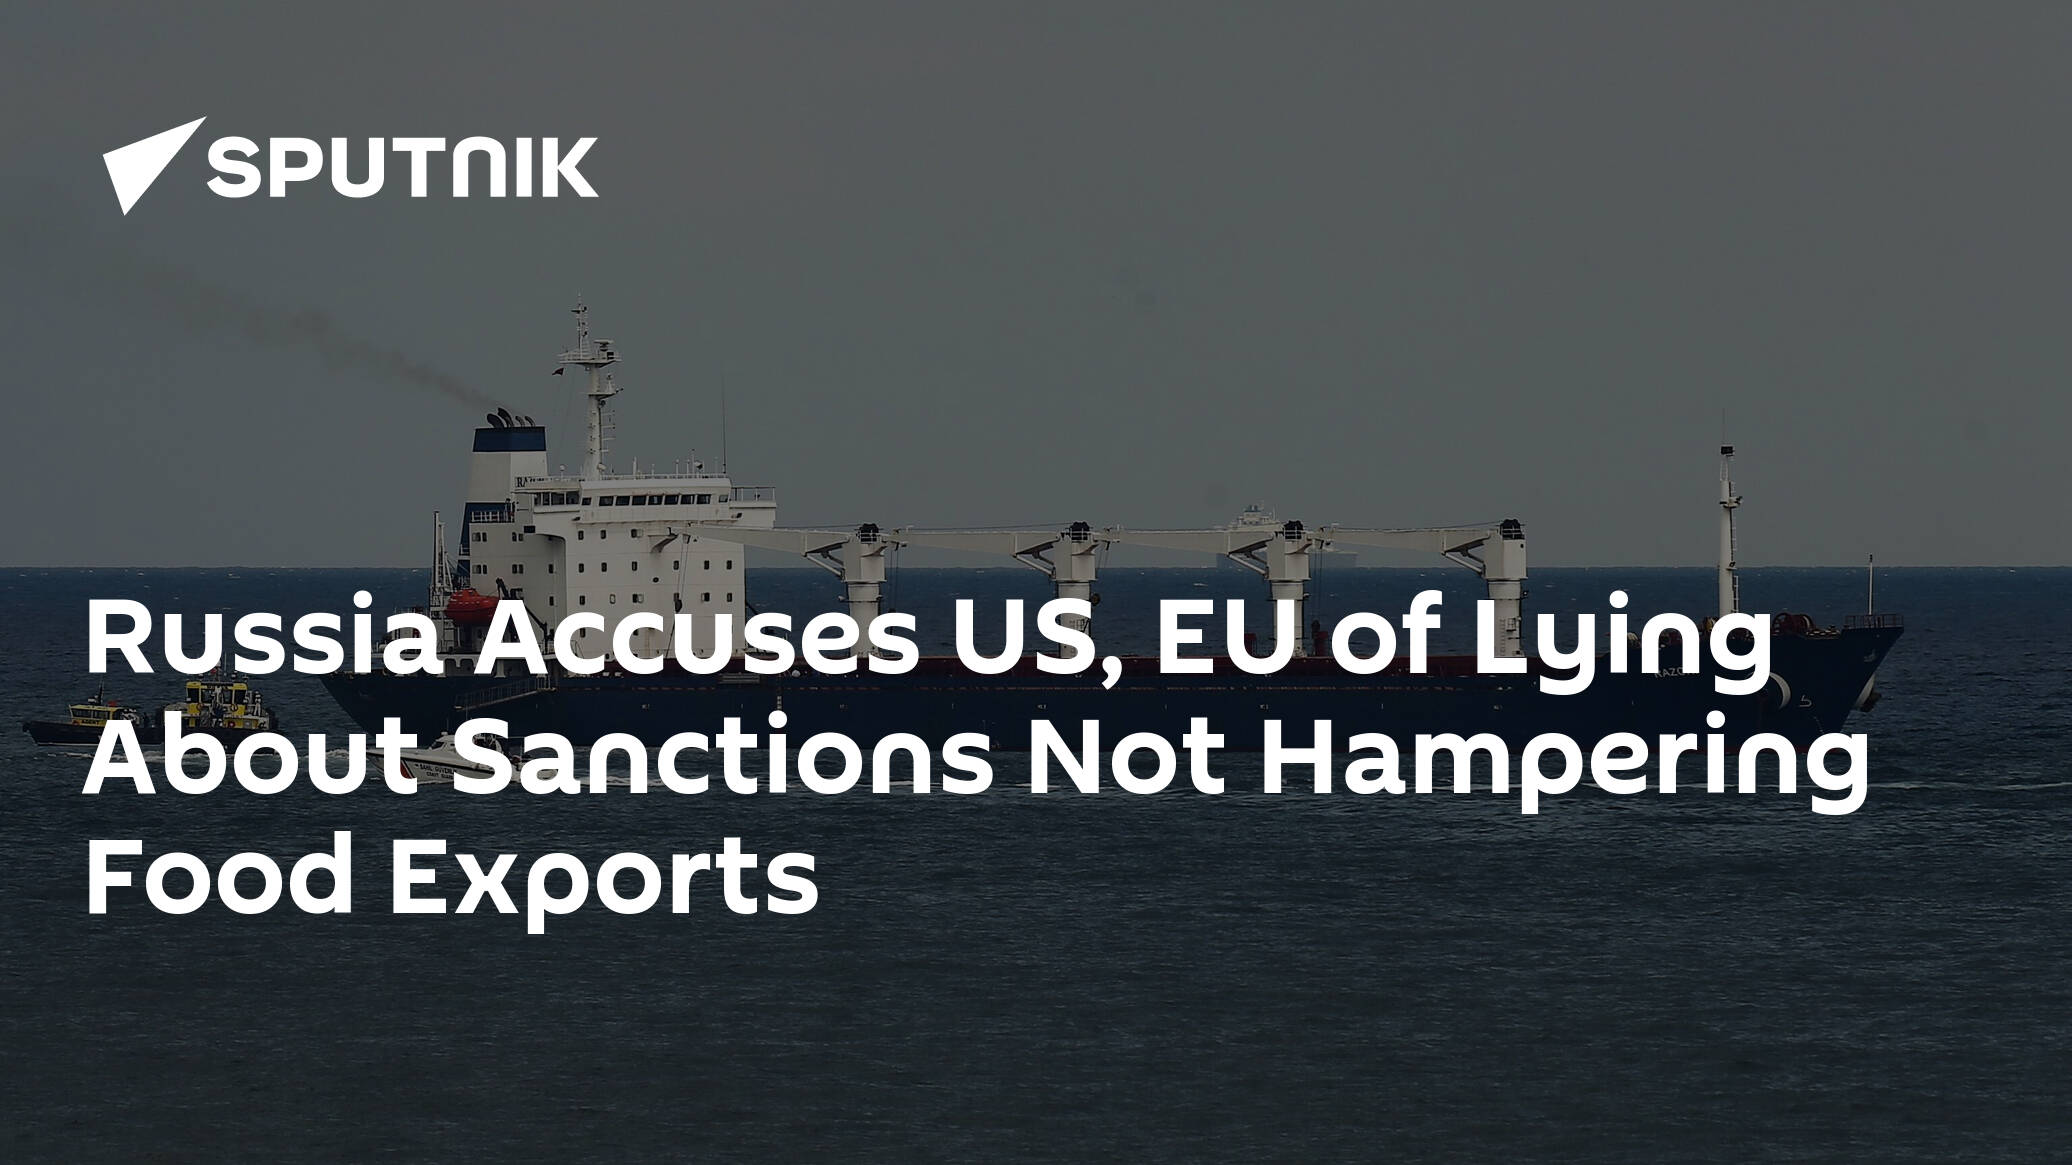 Russia Accuses US, EU of Lying About Sanctions Not Hampering Food Exports